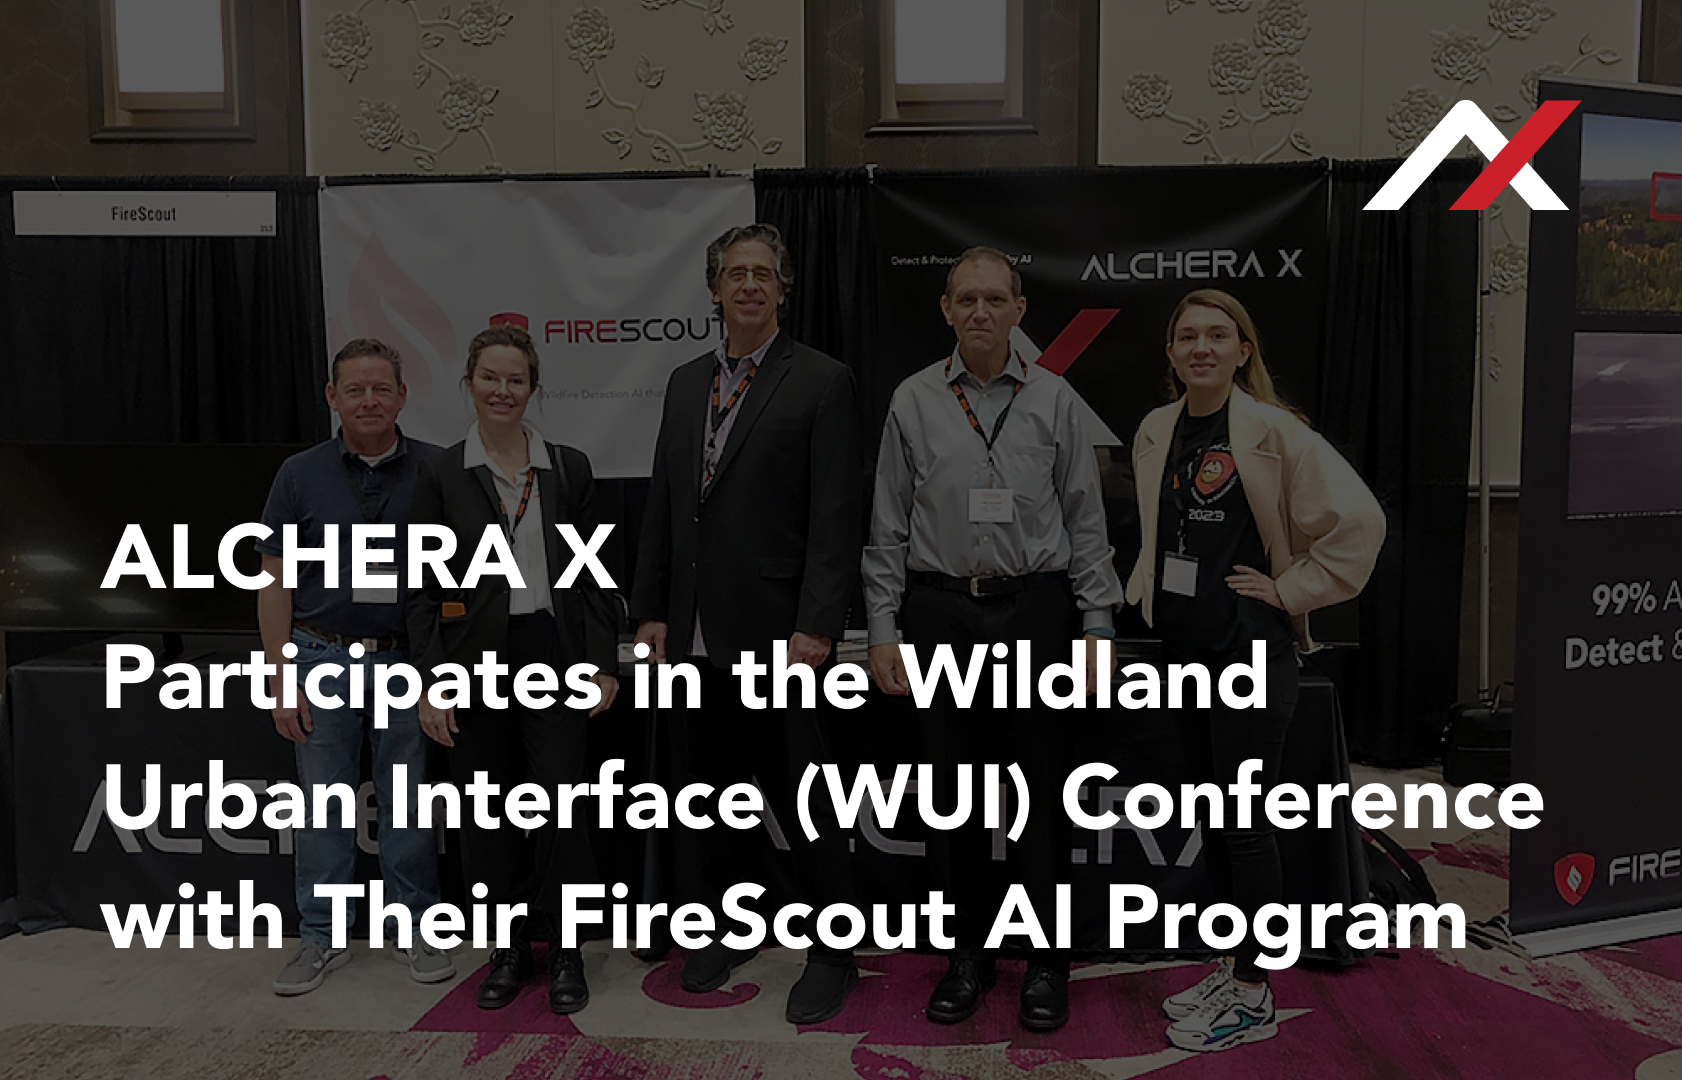 ALCHERA X Participates in the Wildland Urban Interface (WUI) Conference with Their FireScout AI Program